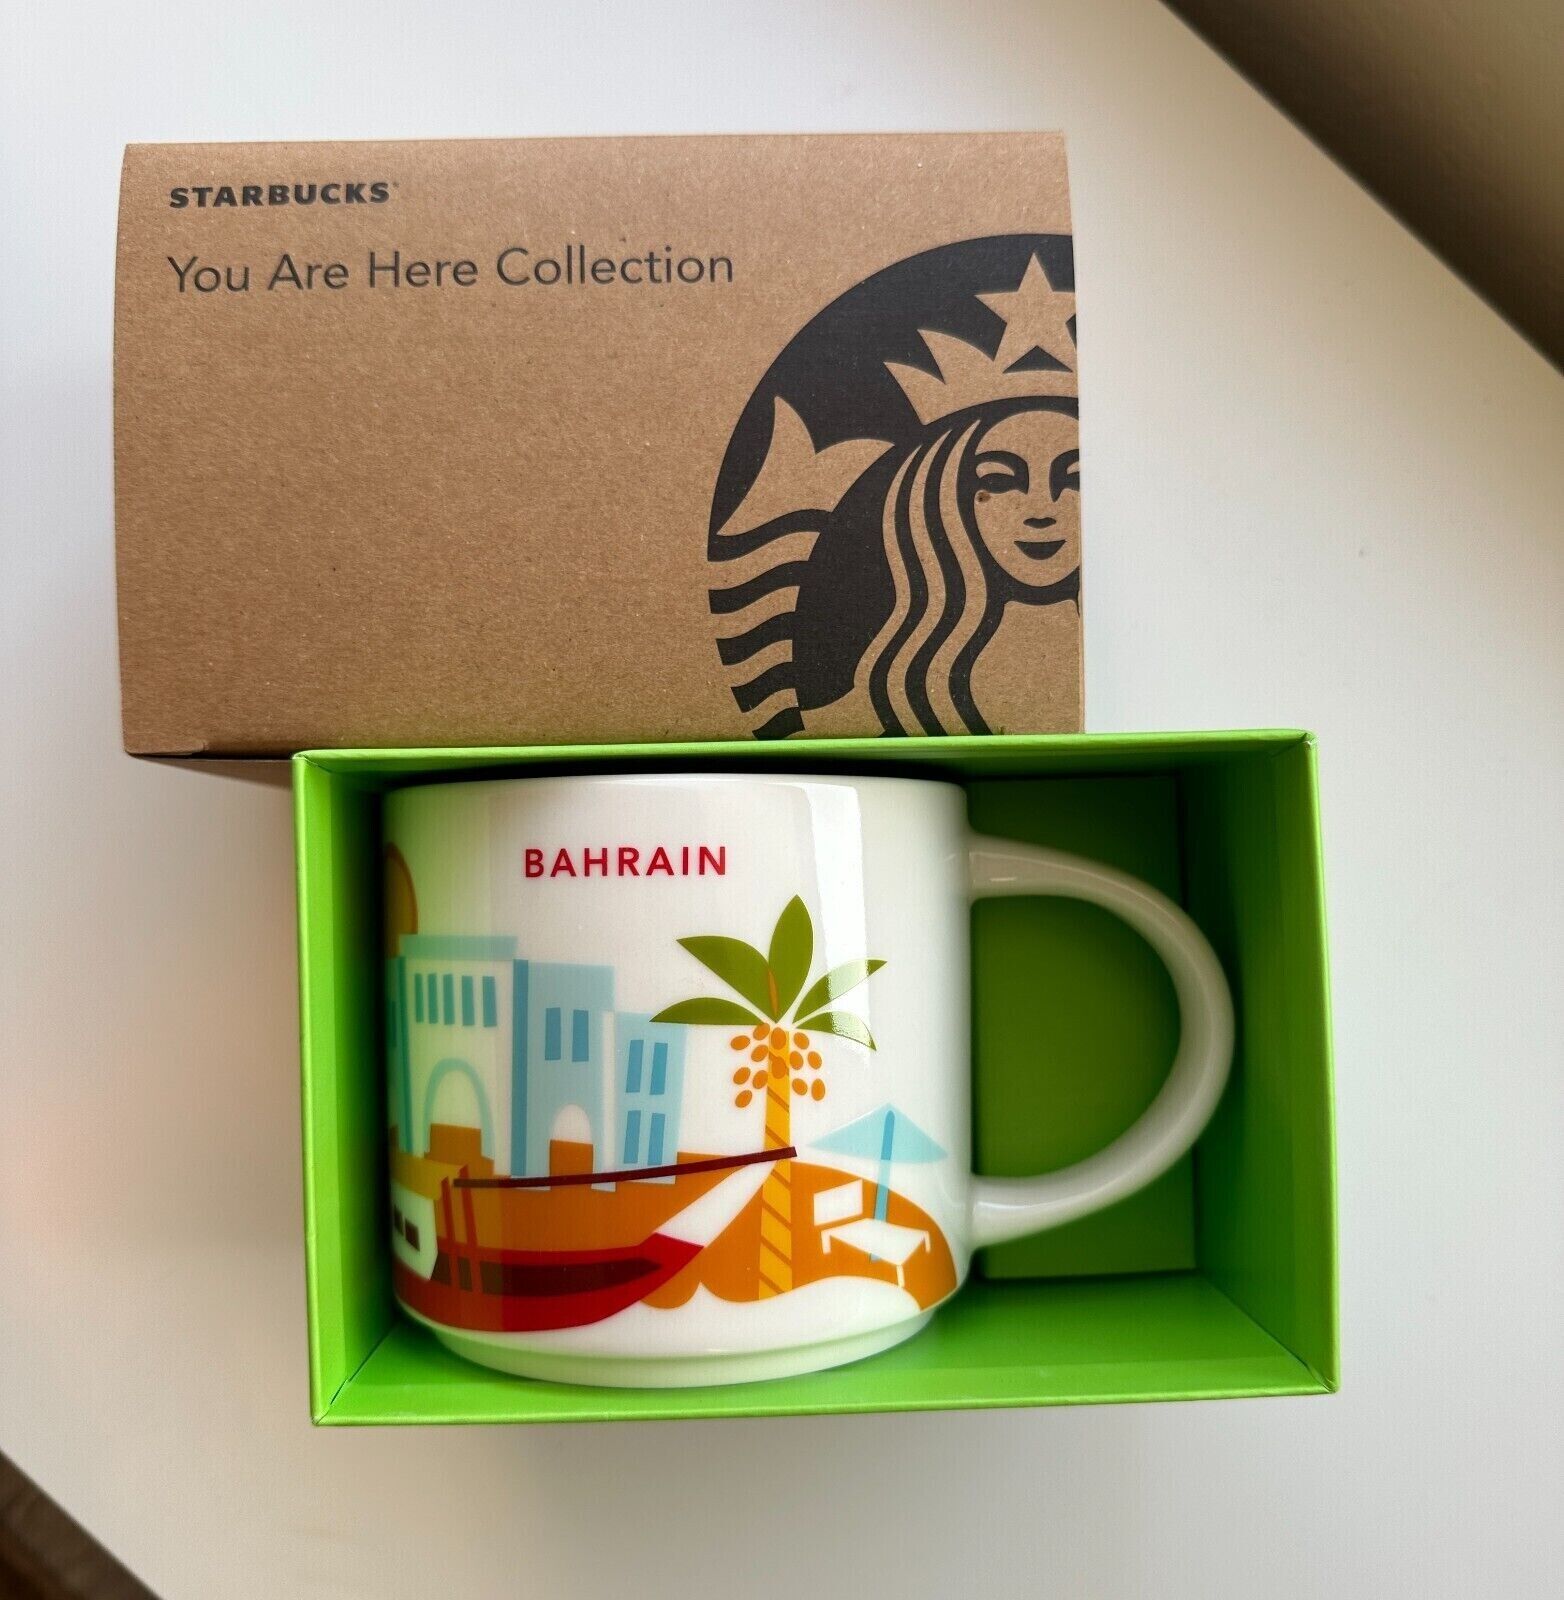 NEW Starbucks BAHRAIN You Are Here Collection Mug Cup 14oz - Ships from USA